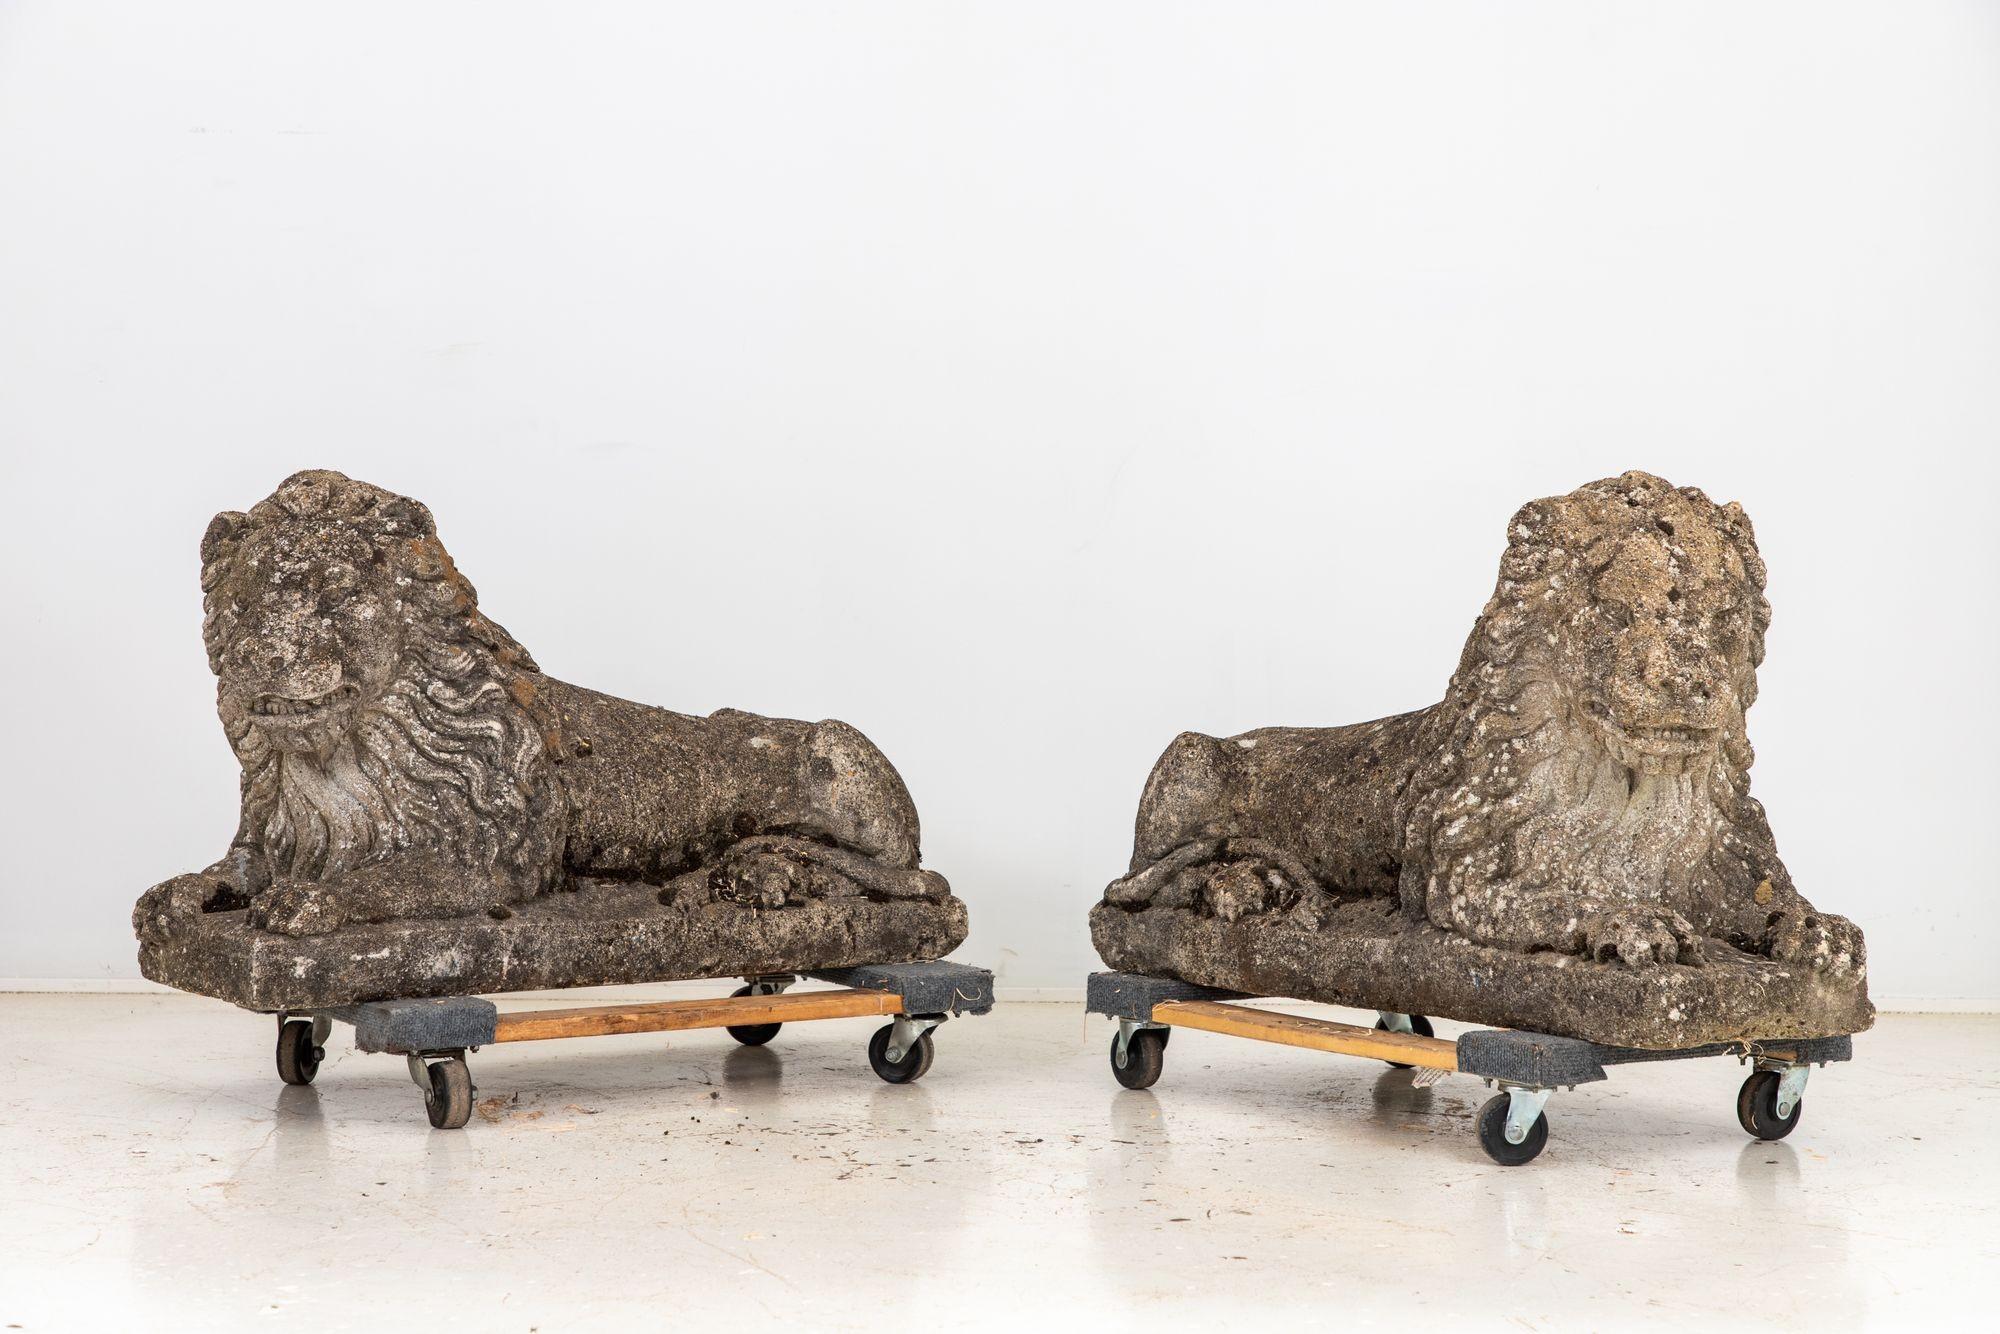 Transport yourself to the opulent grandeur of the early 20th century with this remarkable pair of Circa 1920 English Recumbent Concrete Lions. These large majestic sculptures are a testament to exquisite craftsmanship, capturing every nuance of